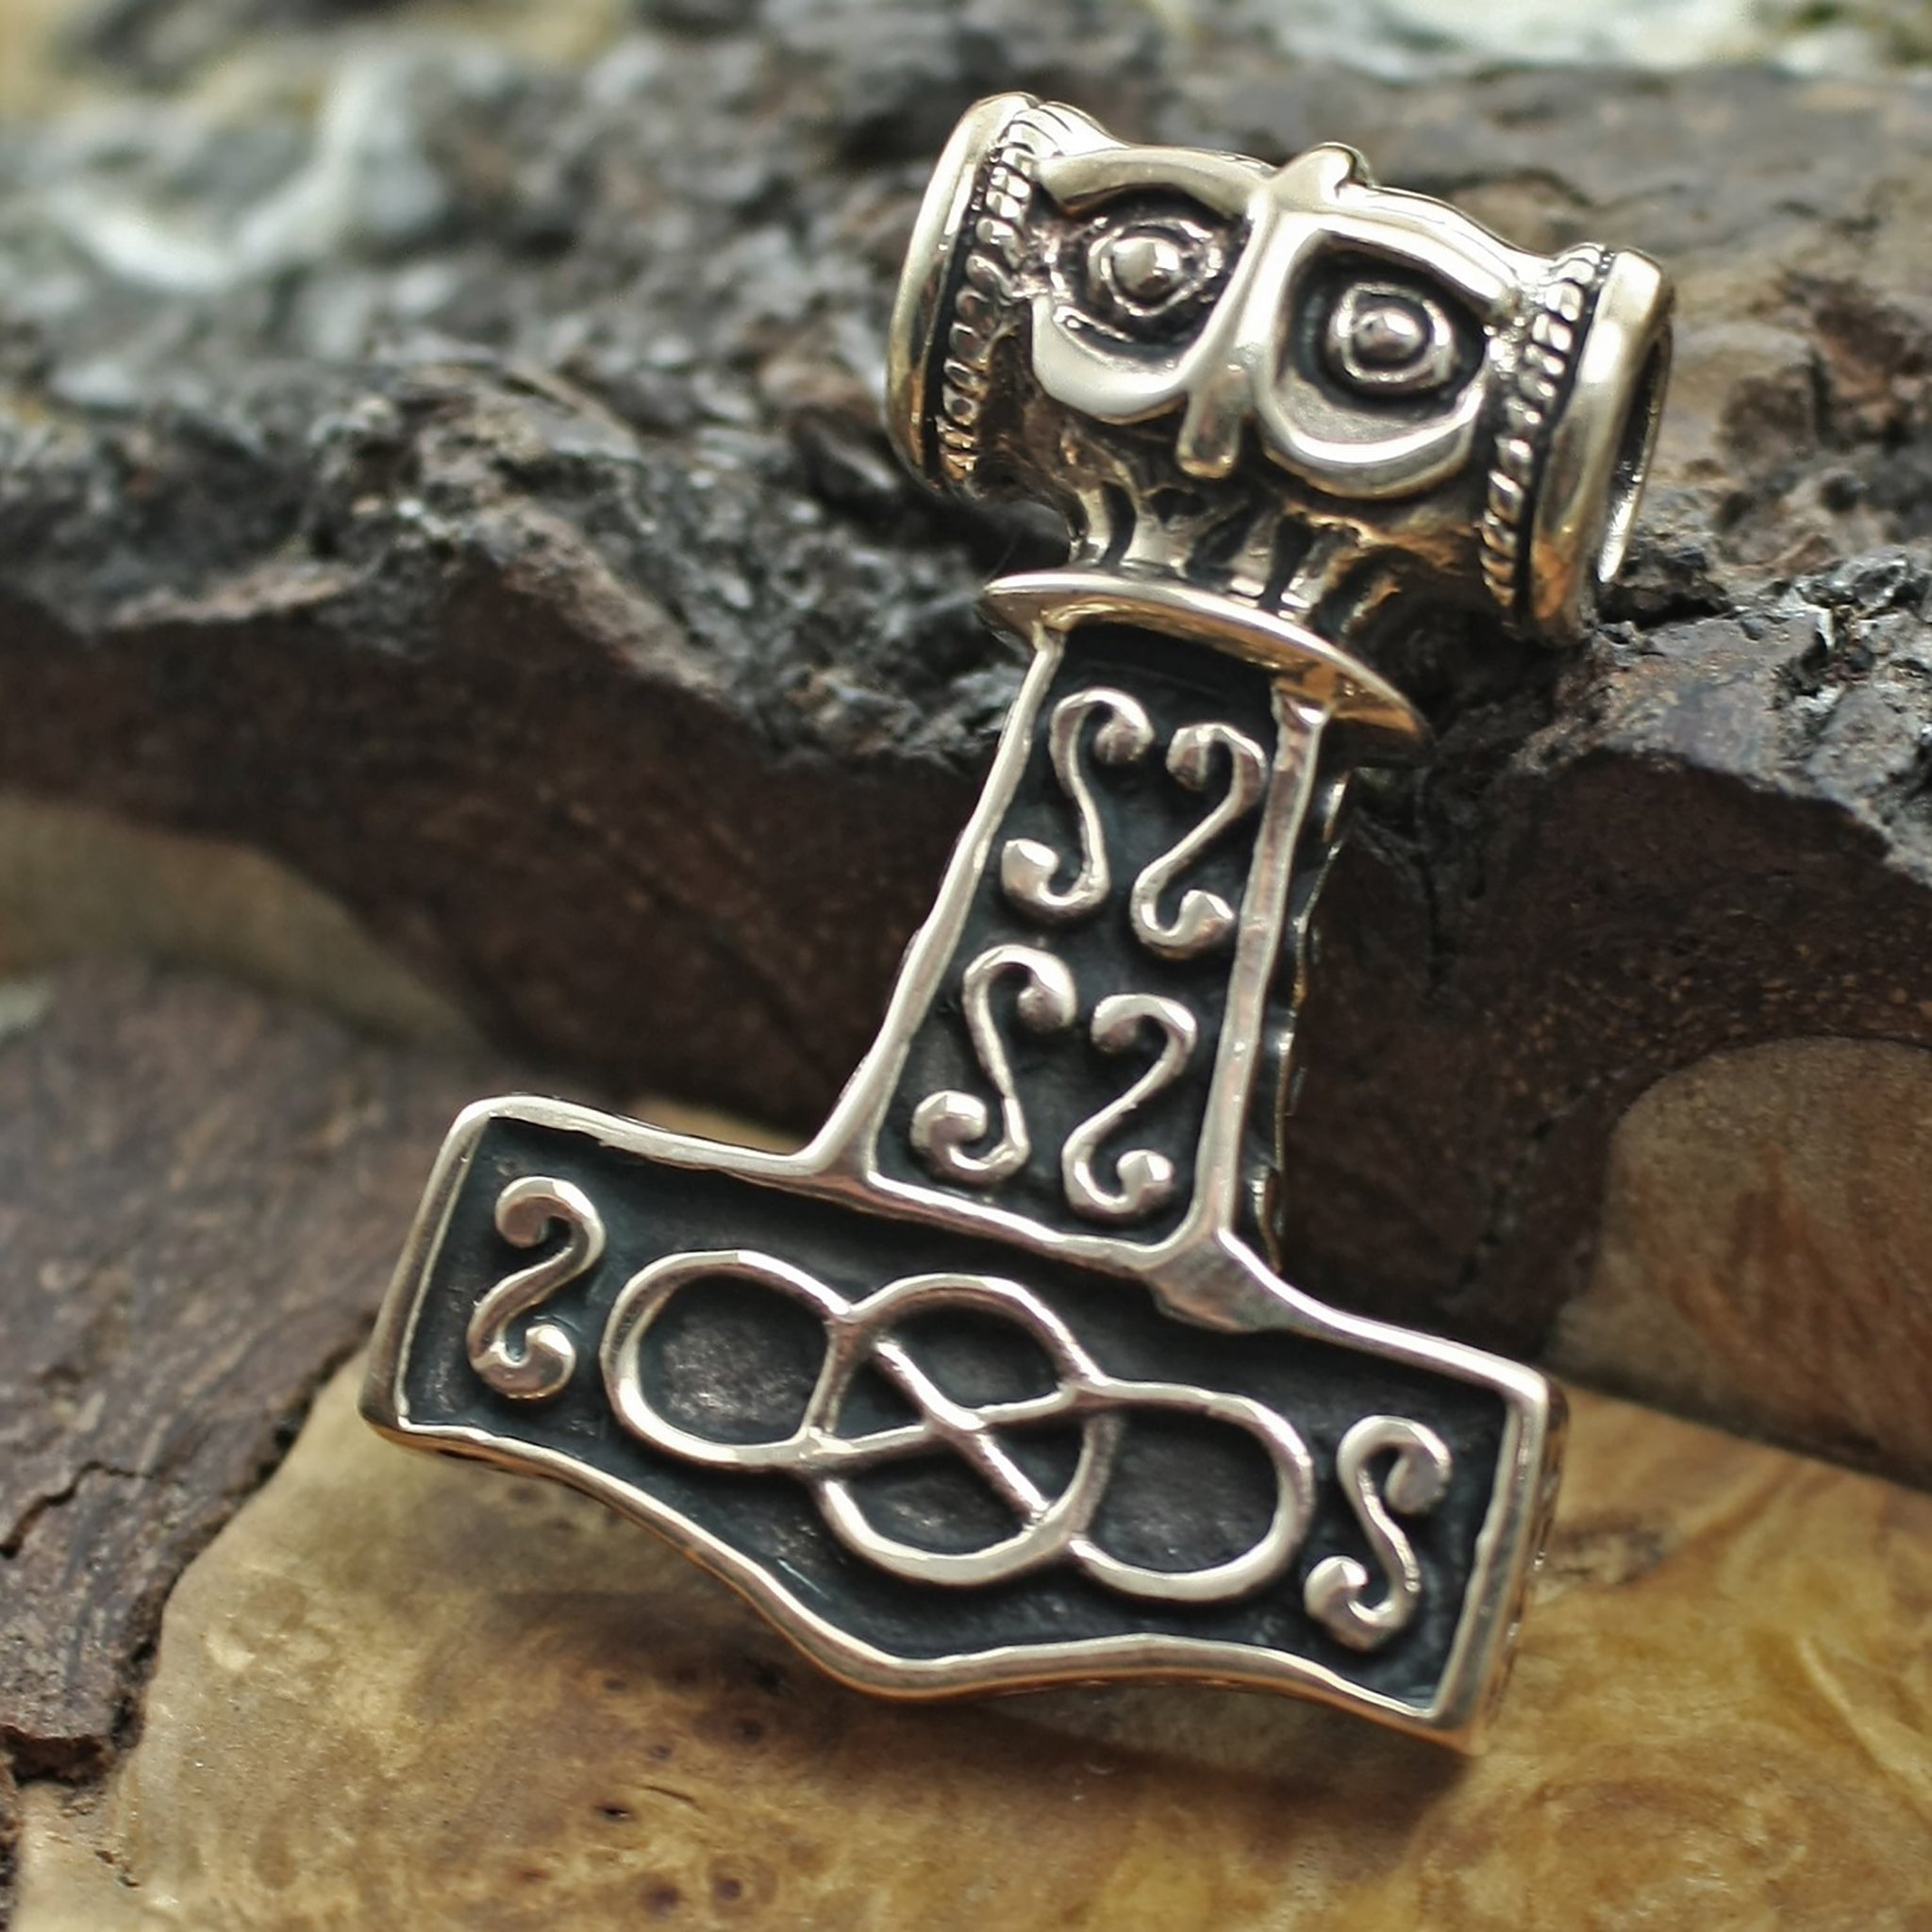 Amazon.com: Viking Thors Hammer Mjolnir Necklace - Solid 925 Sterling  Silver - Celtic Pendant Nordic Amulet Odins Norse Mythology Jewelry for Men  Women - Handmade - Fathers Day Gifts - Medium Size : Handmade Products